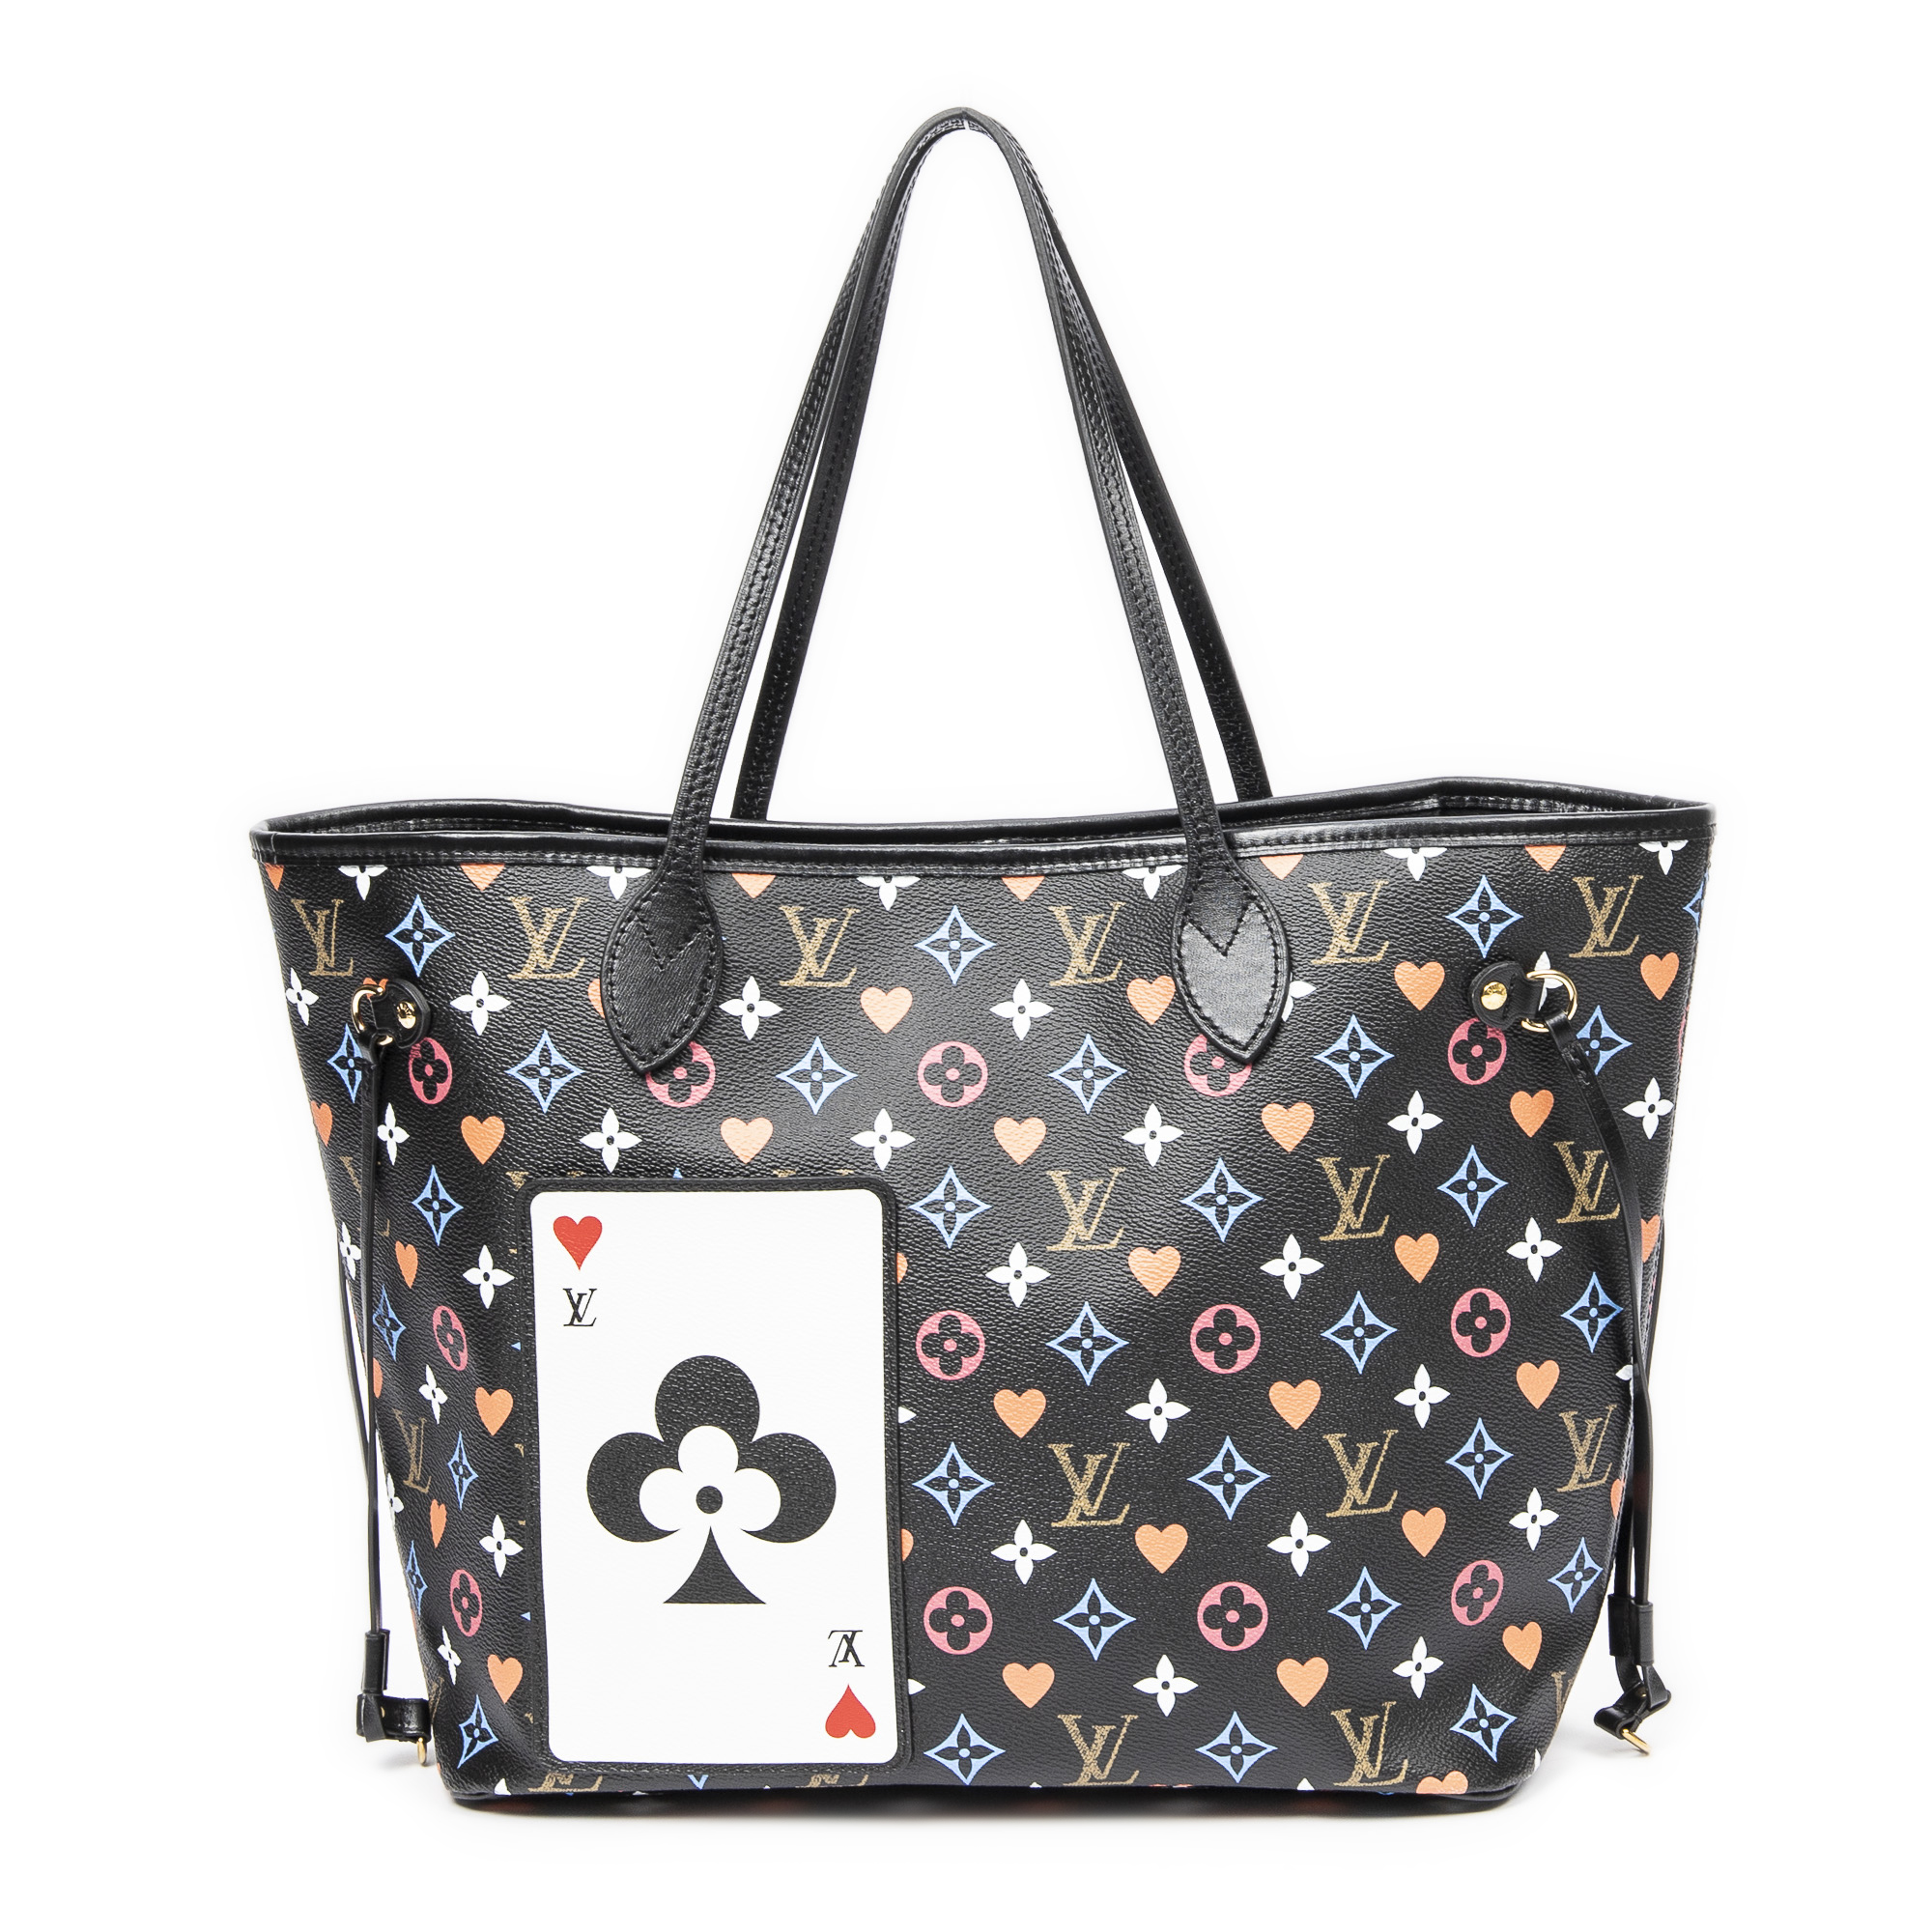 LOUIS VUITTON GAME ON CRUISE 2021 COLLECTION